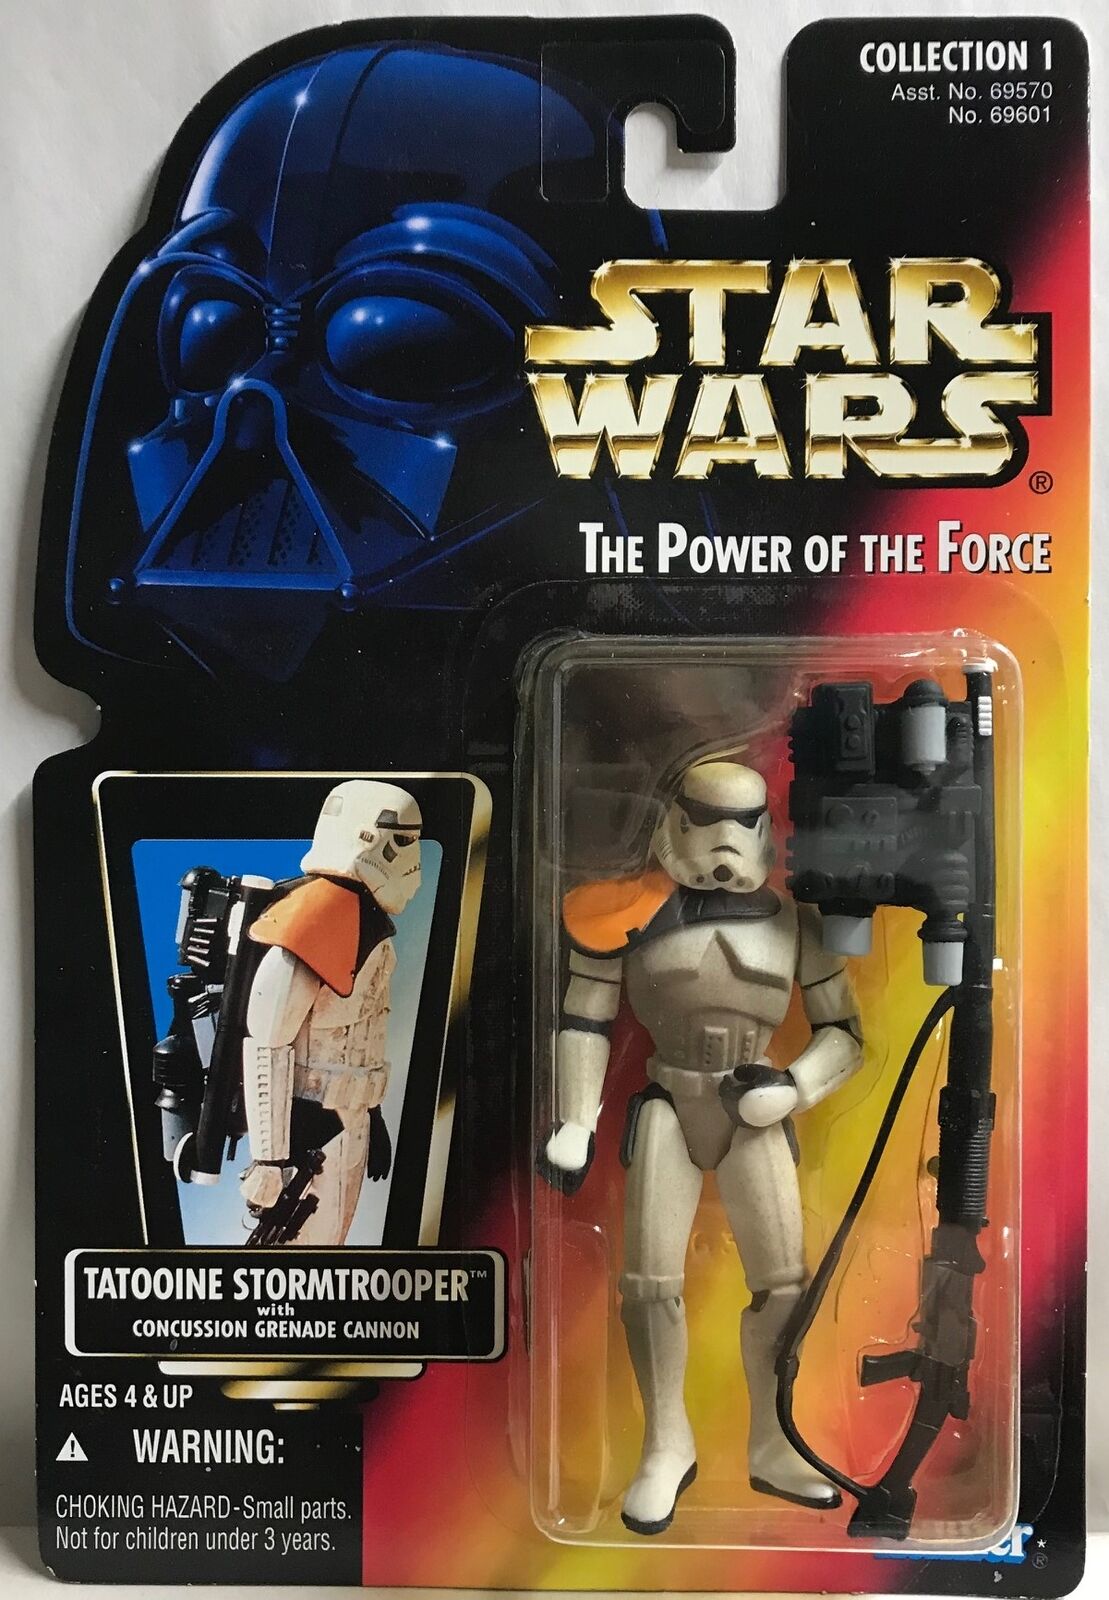 STAR WARS - KENNER - POTF - TATOOINE STORMTROOPER - with Concussion Grenade